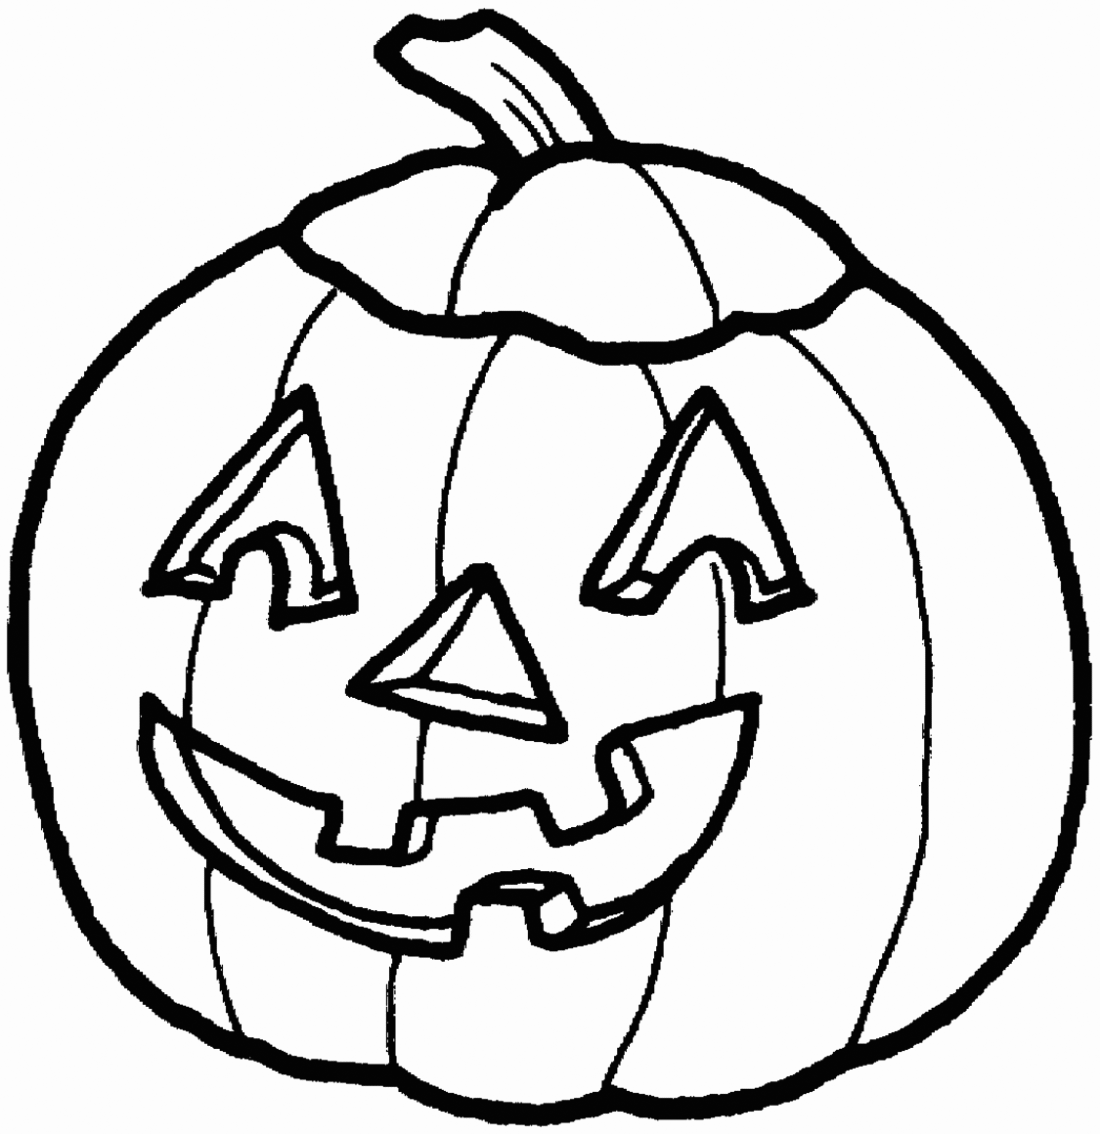 Download Halloween Pumpkin Coloring Pages - Best Coloring Pages For ...